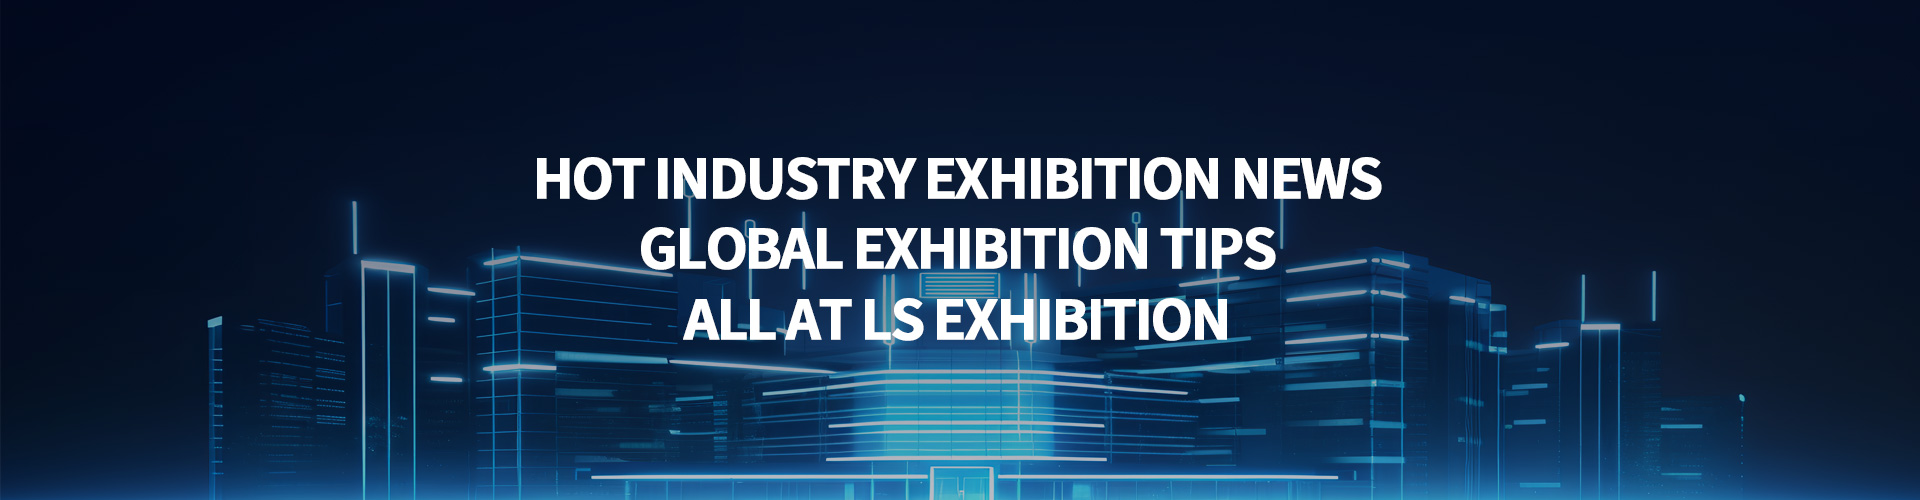 Hot Industry Exhibition News